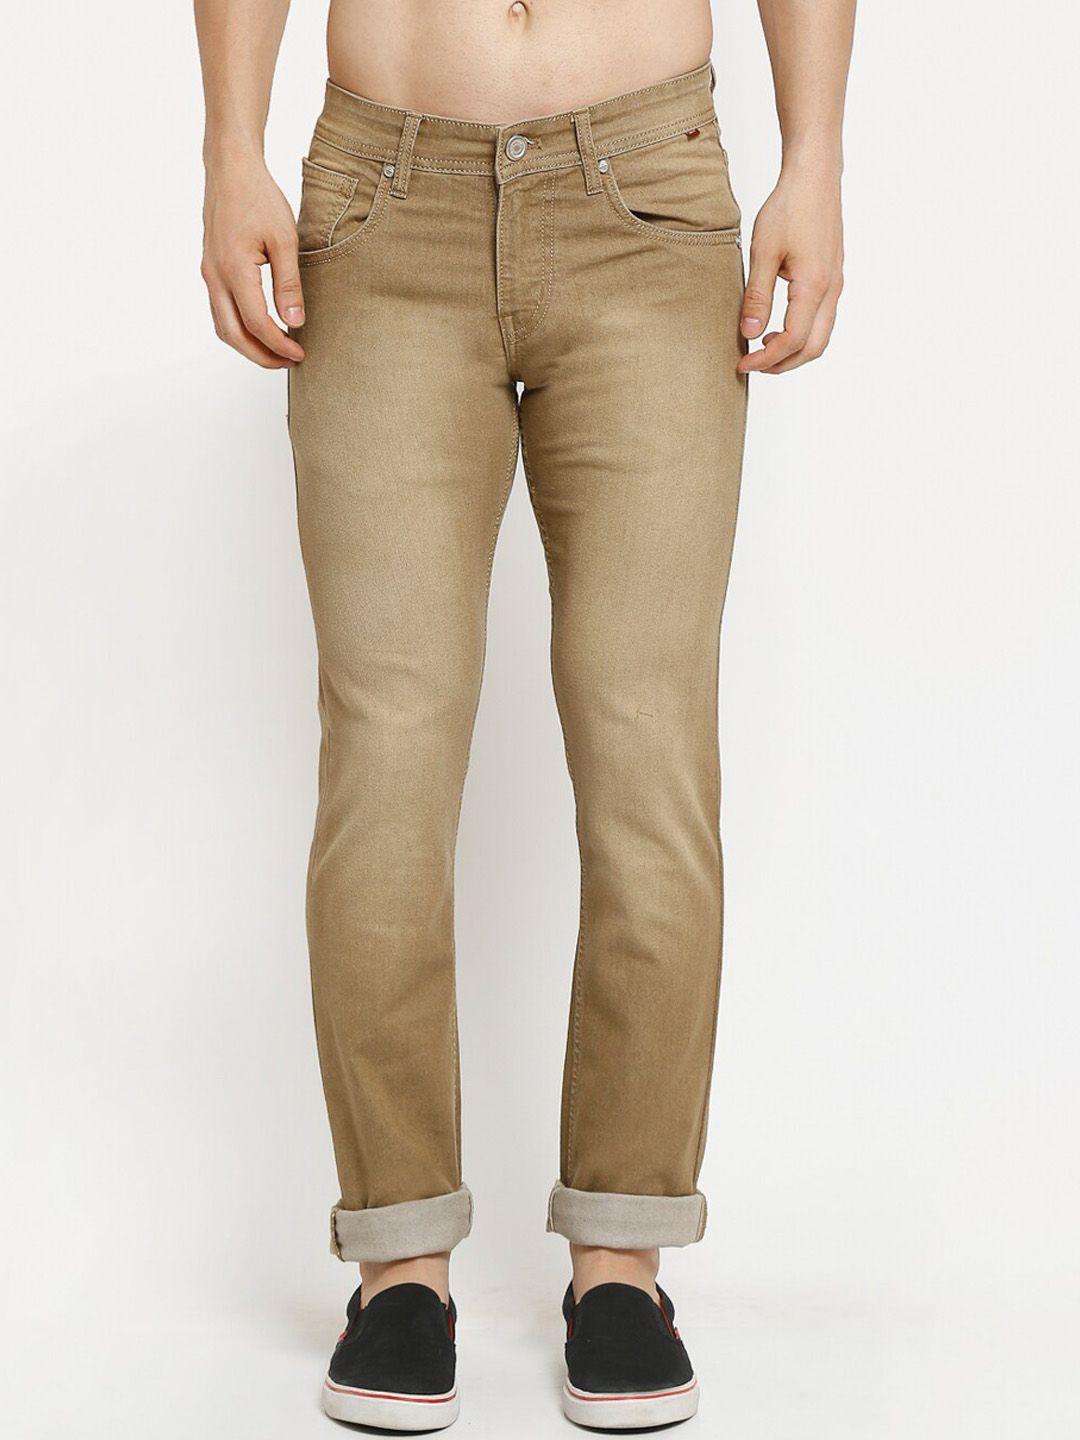 cantabil-men-brown-slim-fit-mid-rise-light-fade-jeans